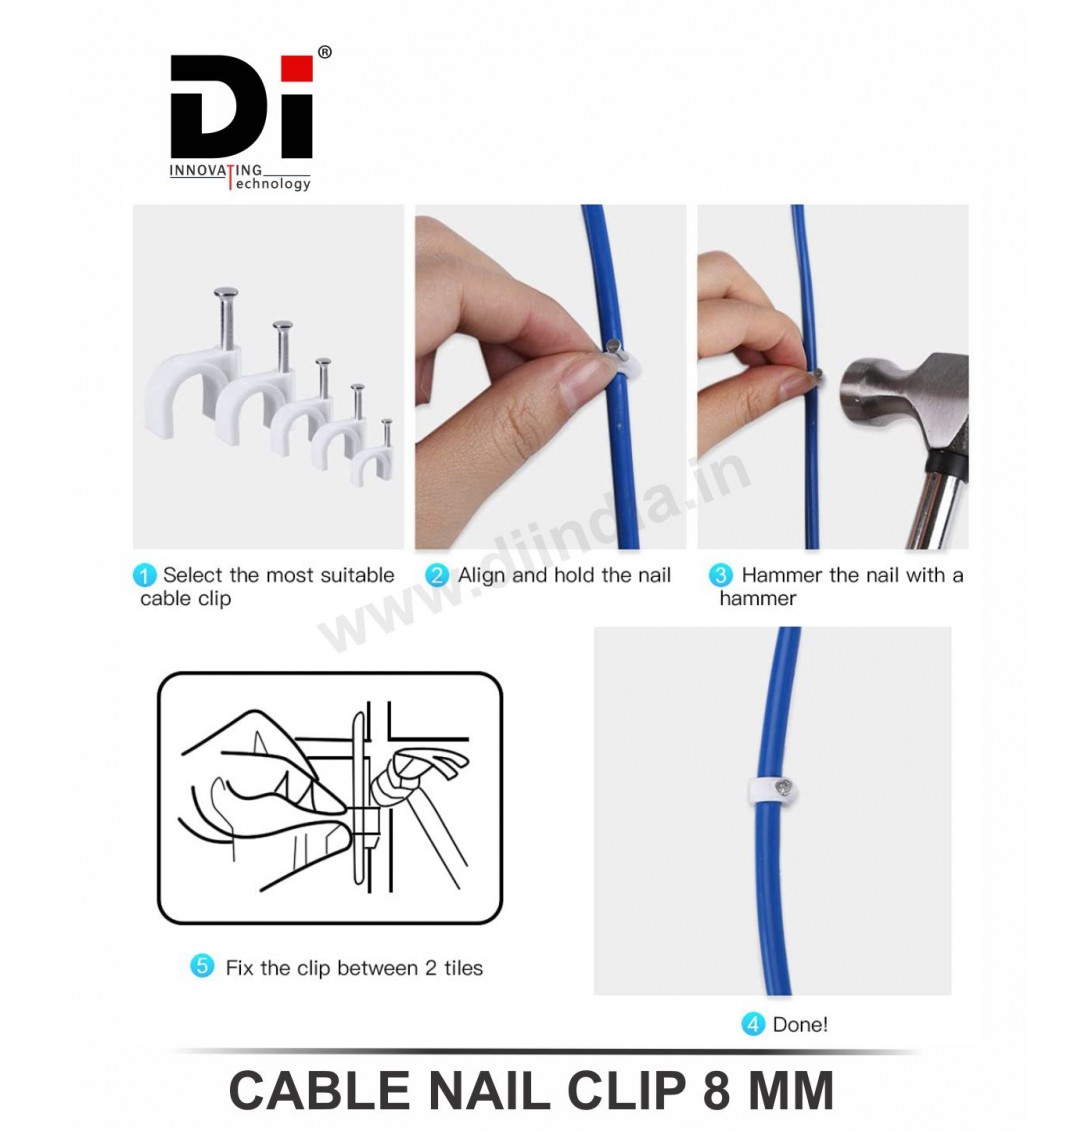 CABLE NAIL CLIP 8MM ( INCLUDING GST )